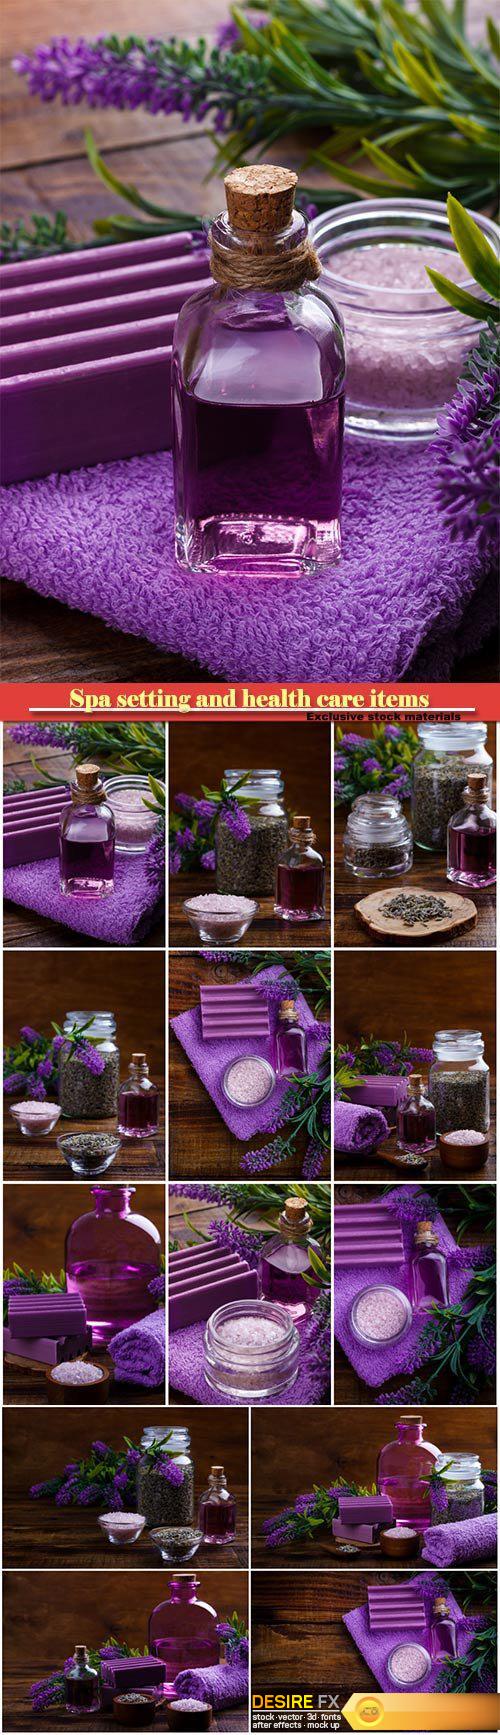 Spa setting and health care items, lavender handmade soap, body oil, bath salt, towel, on wooden board